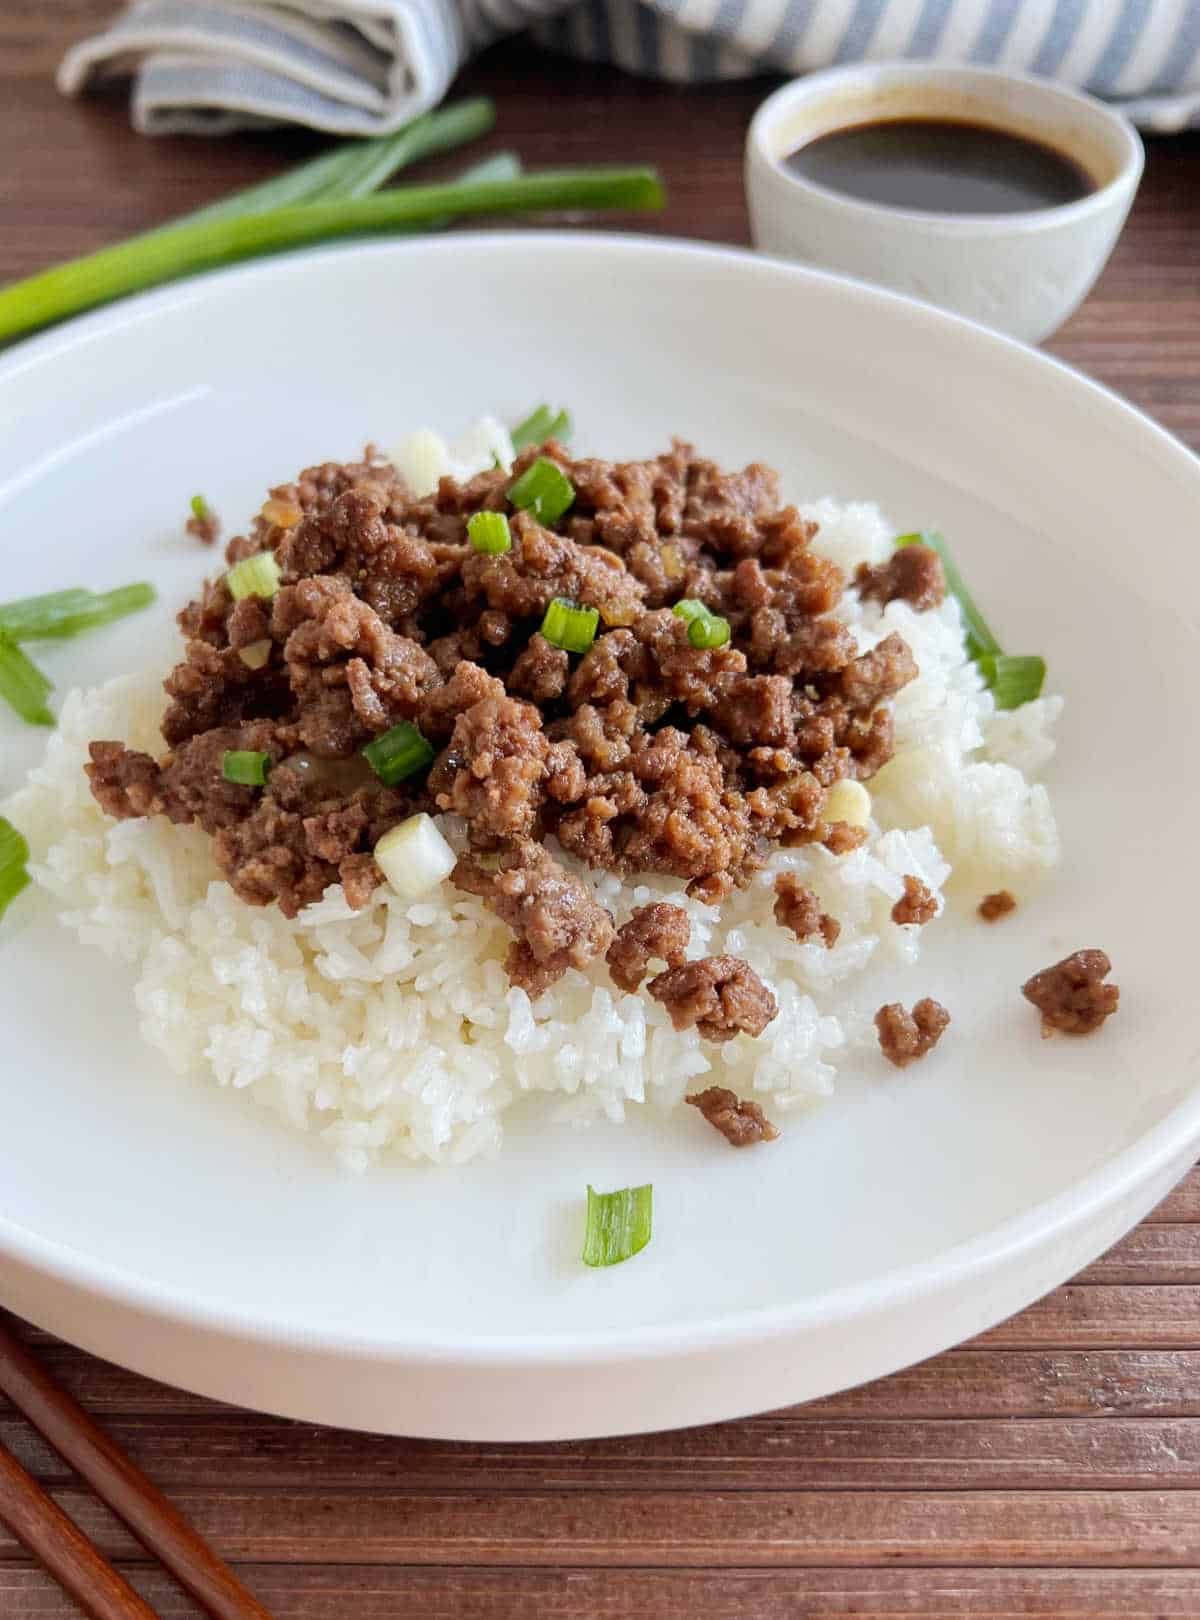 Plate of Korean ground beef over rice on the table.